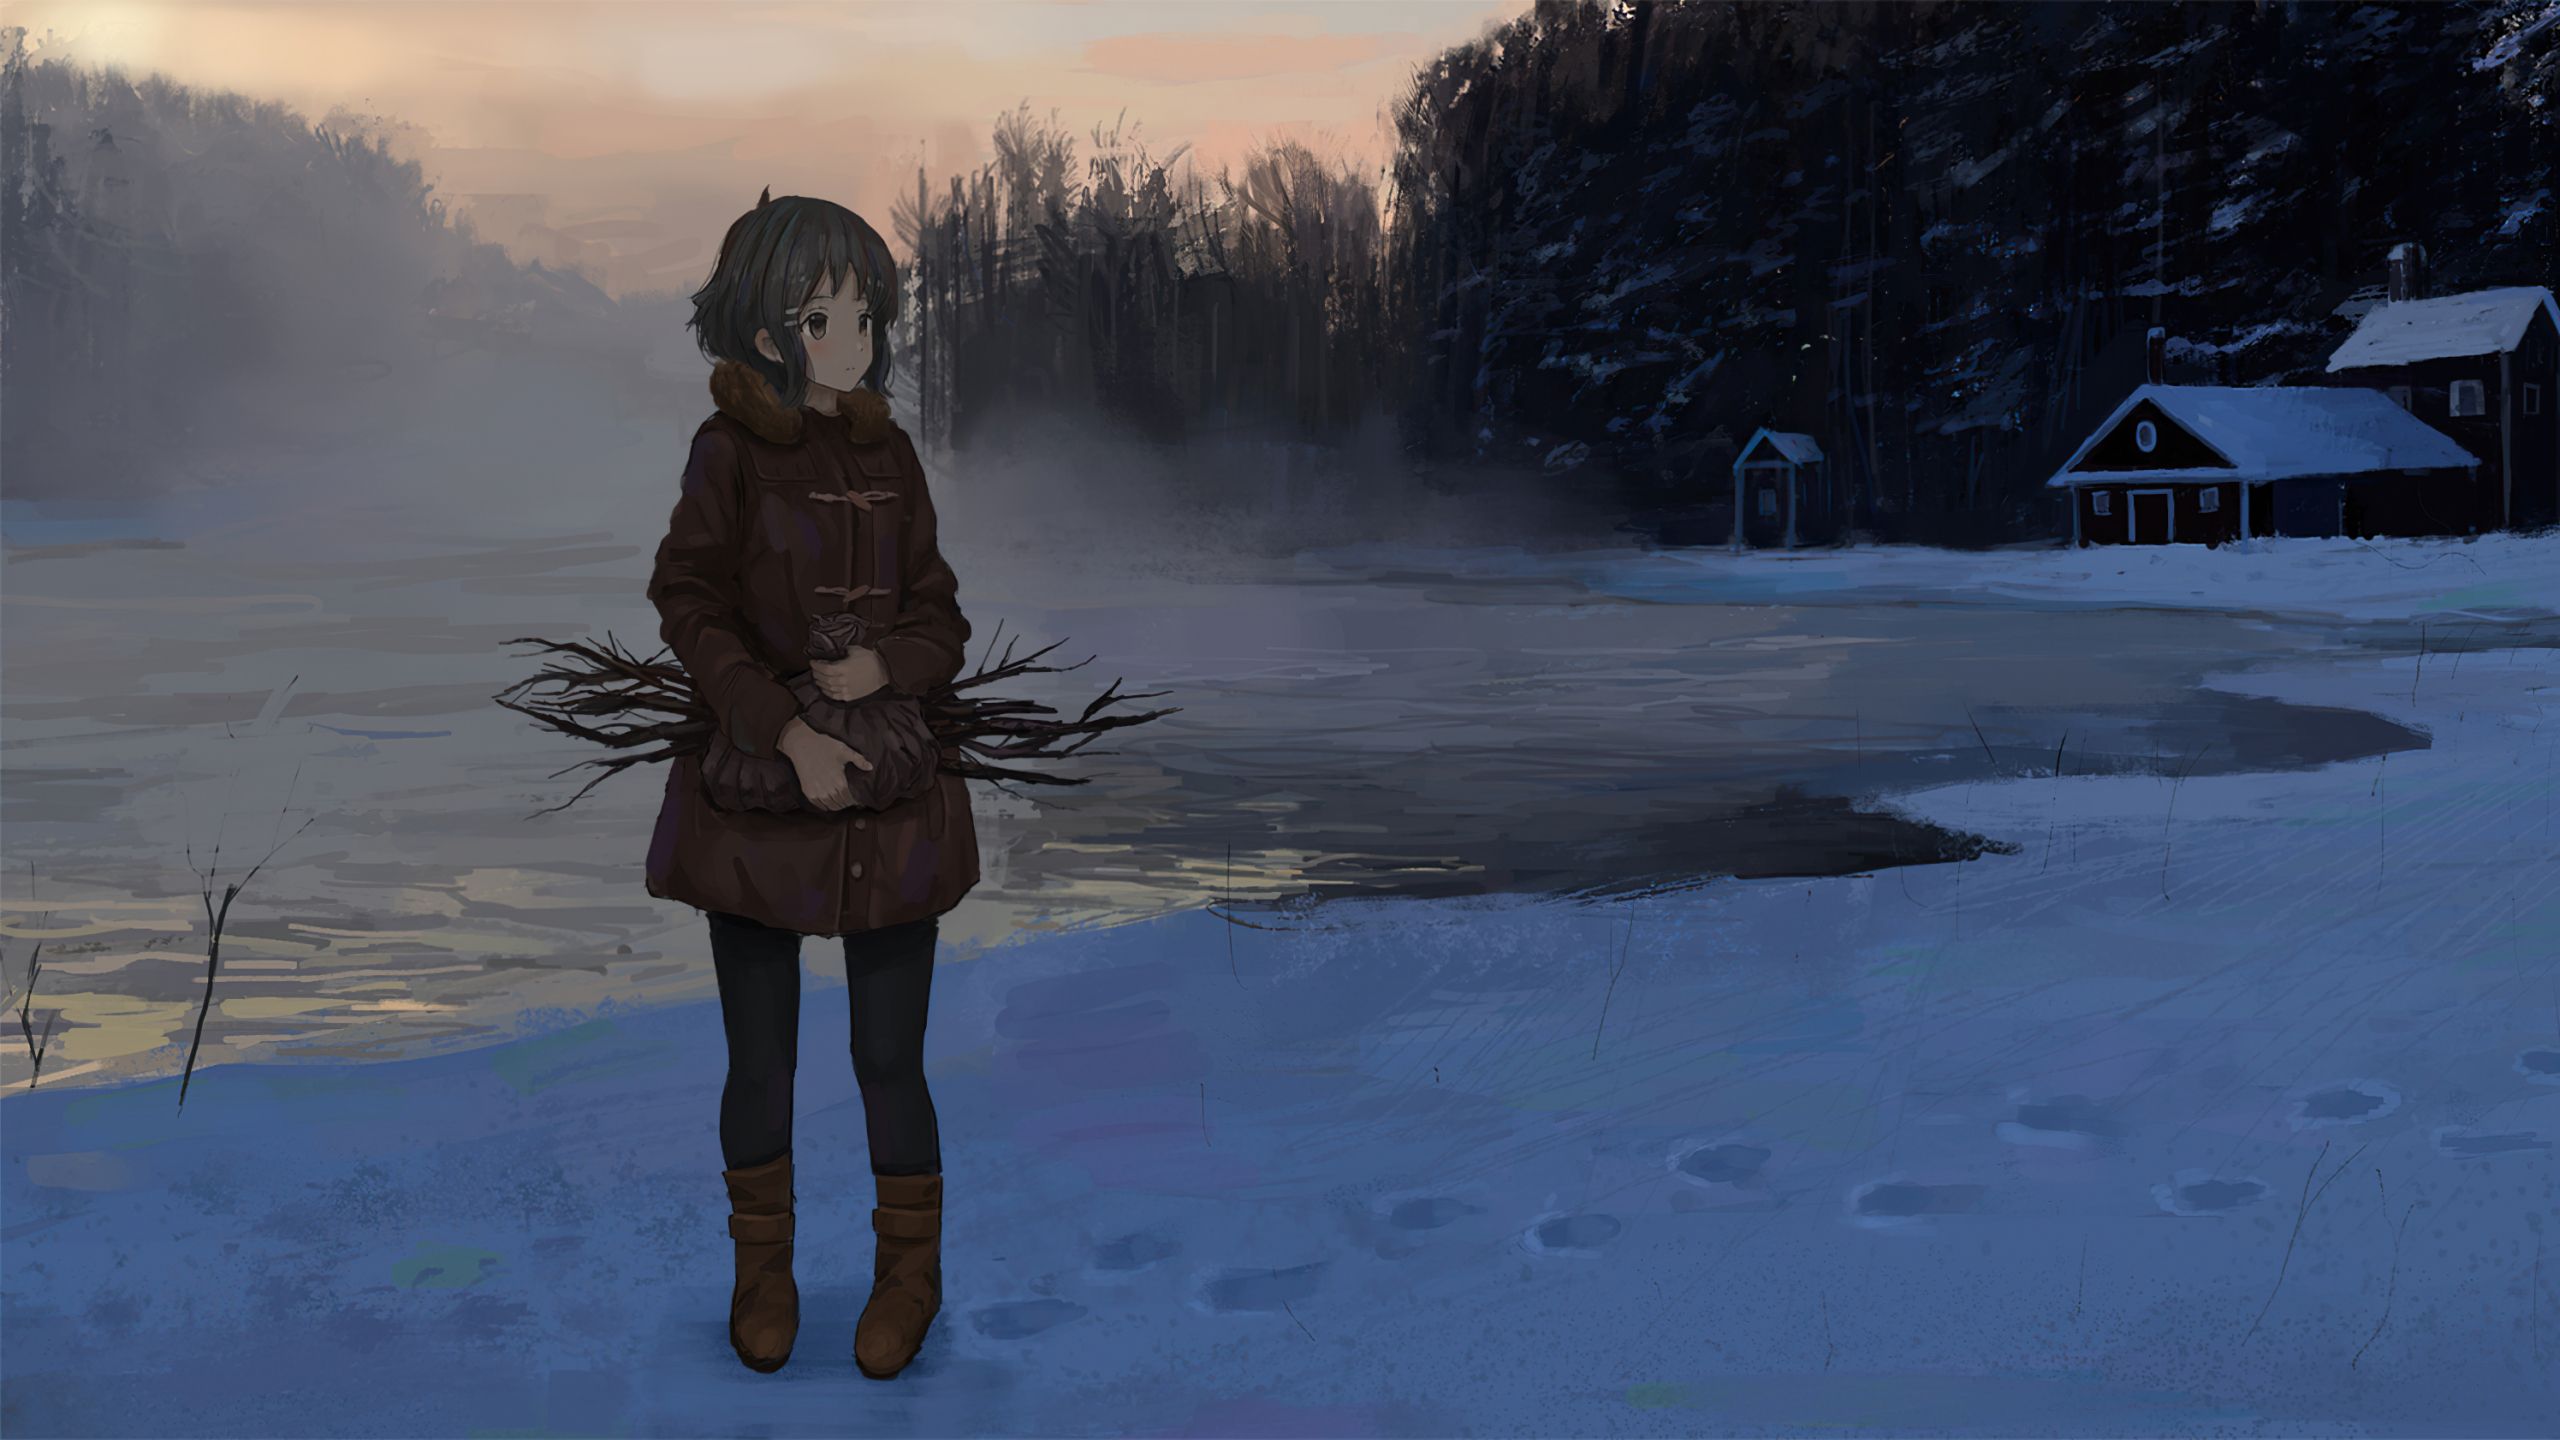 Anime Girl in Winter 1440P Resolution Wallpaper, HD Anime 4K Wallpaper, Image, Photo and Background